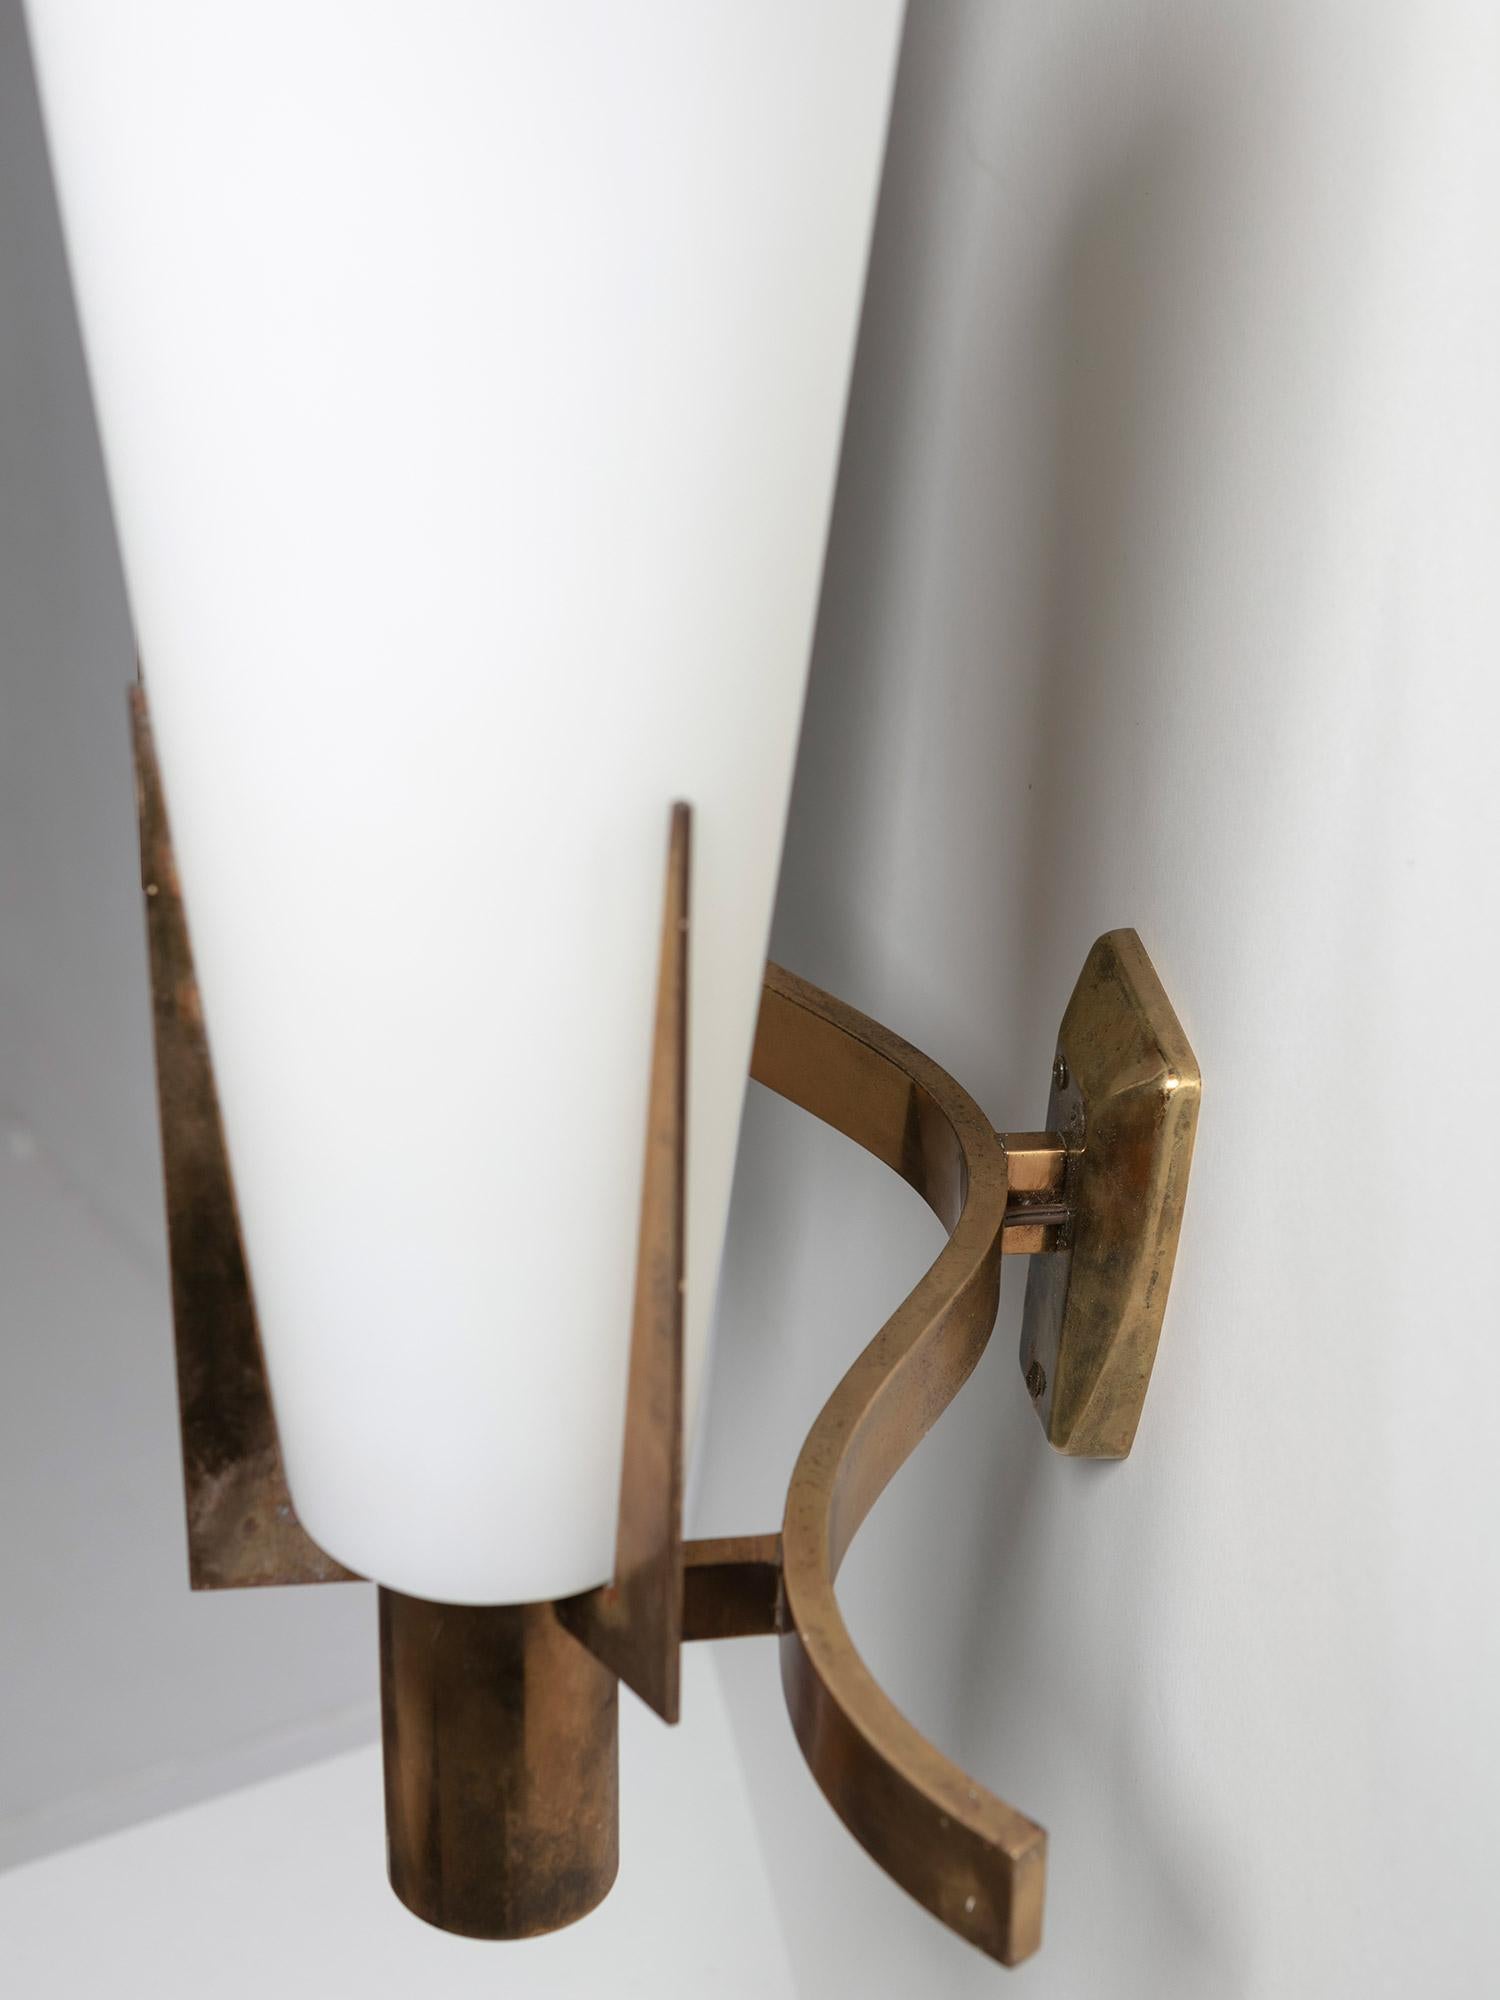 Large Opaline and Brass Model 2021/2 Wall Lamp by Stilnovo, Italy, 1960s For Sale 1